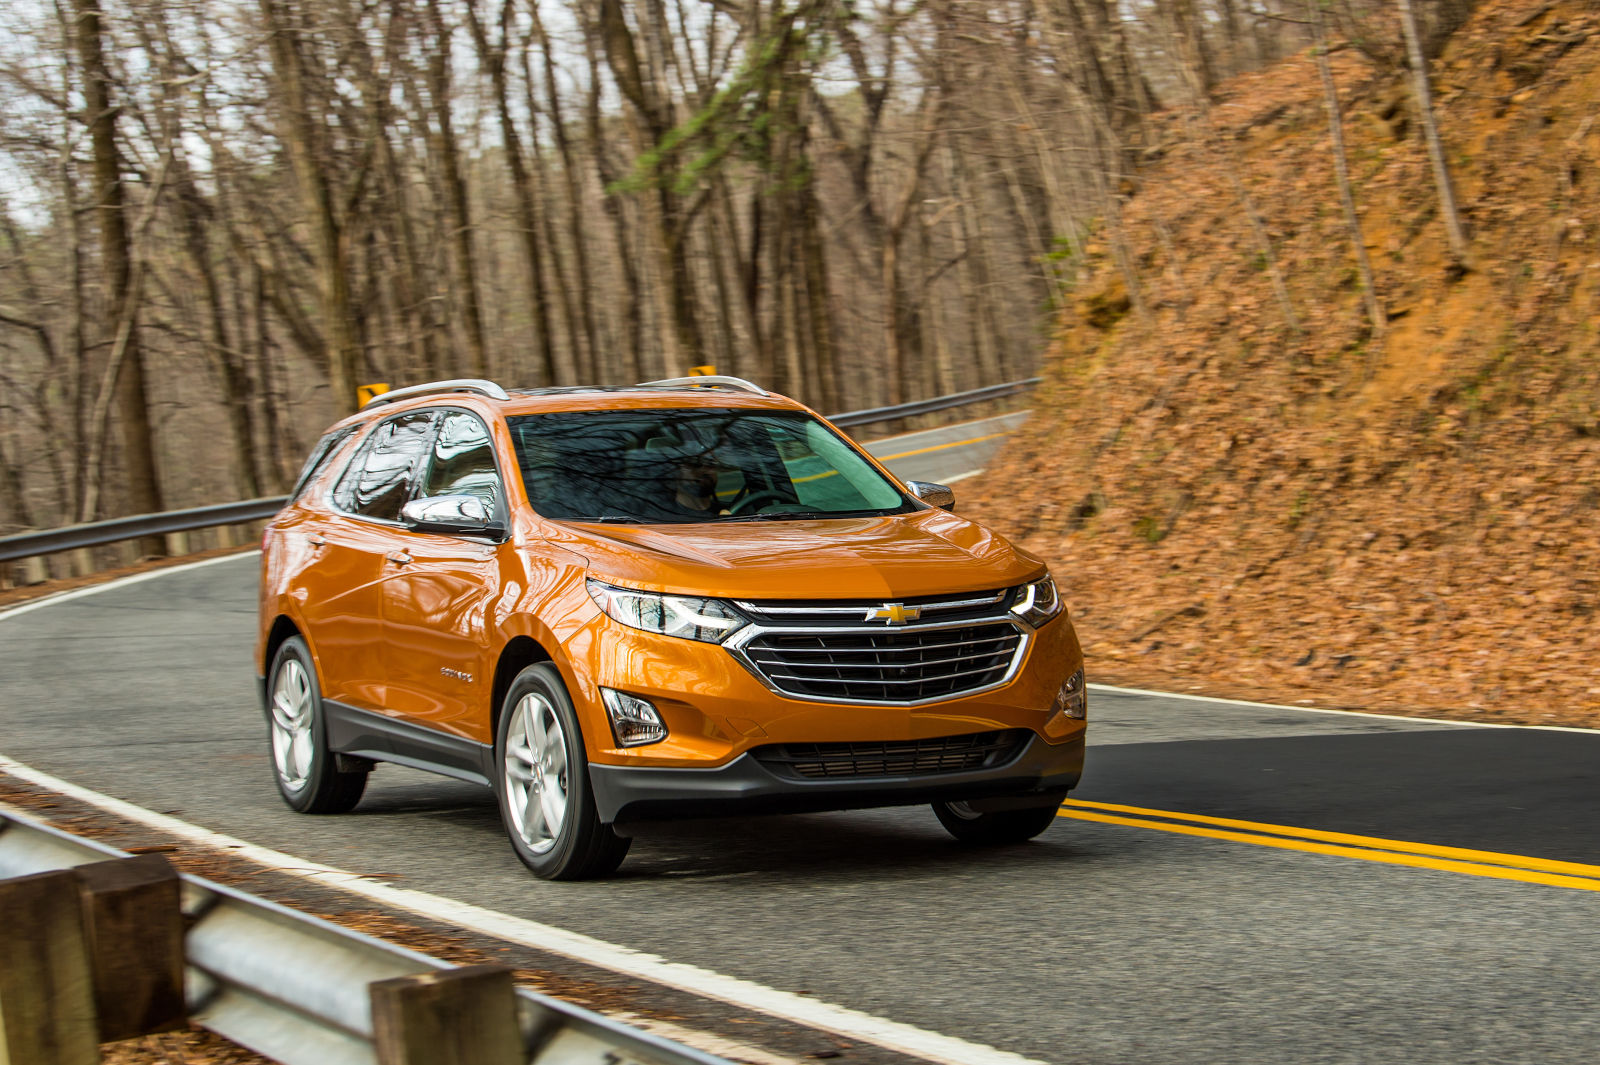 Why buy a pre-owned Chevrolet Equinox?